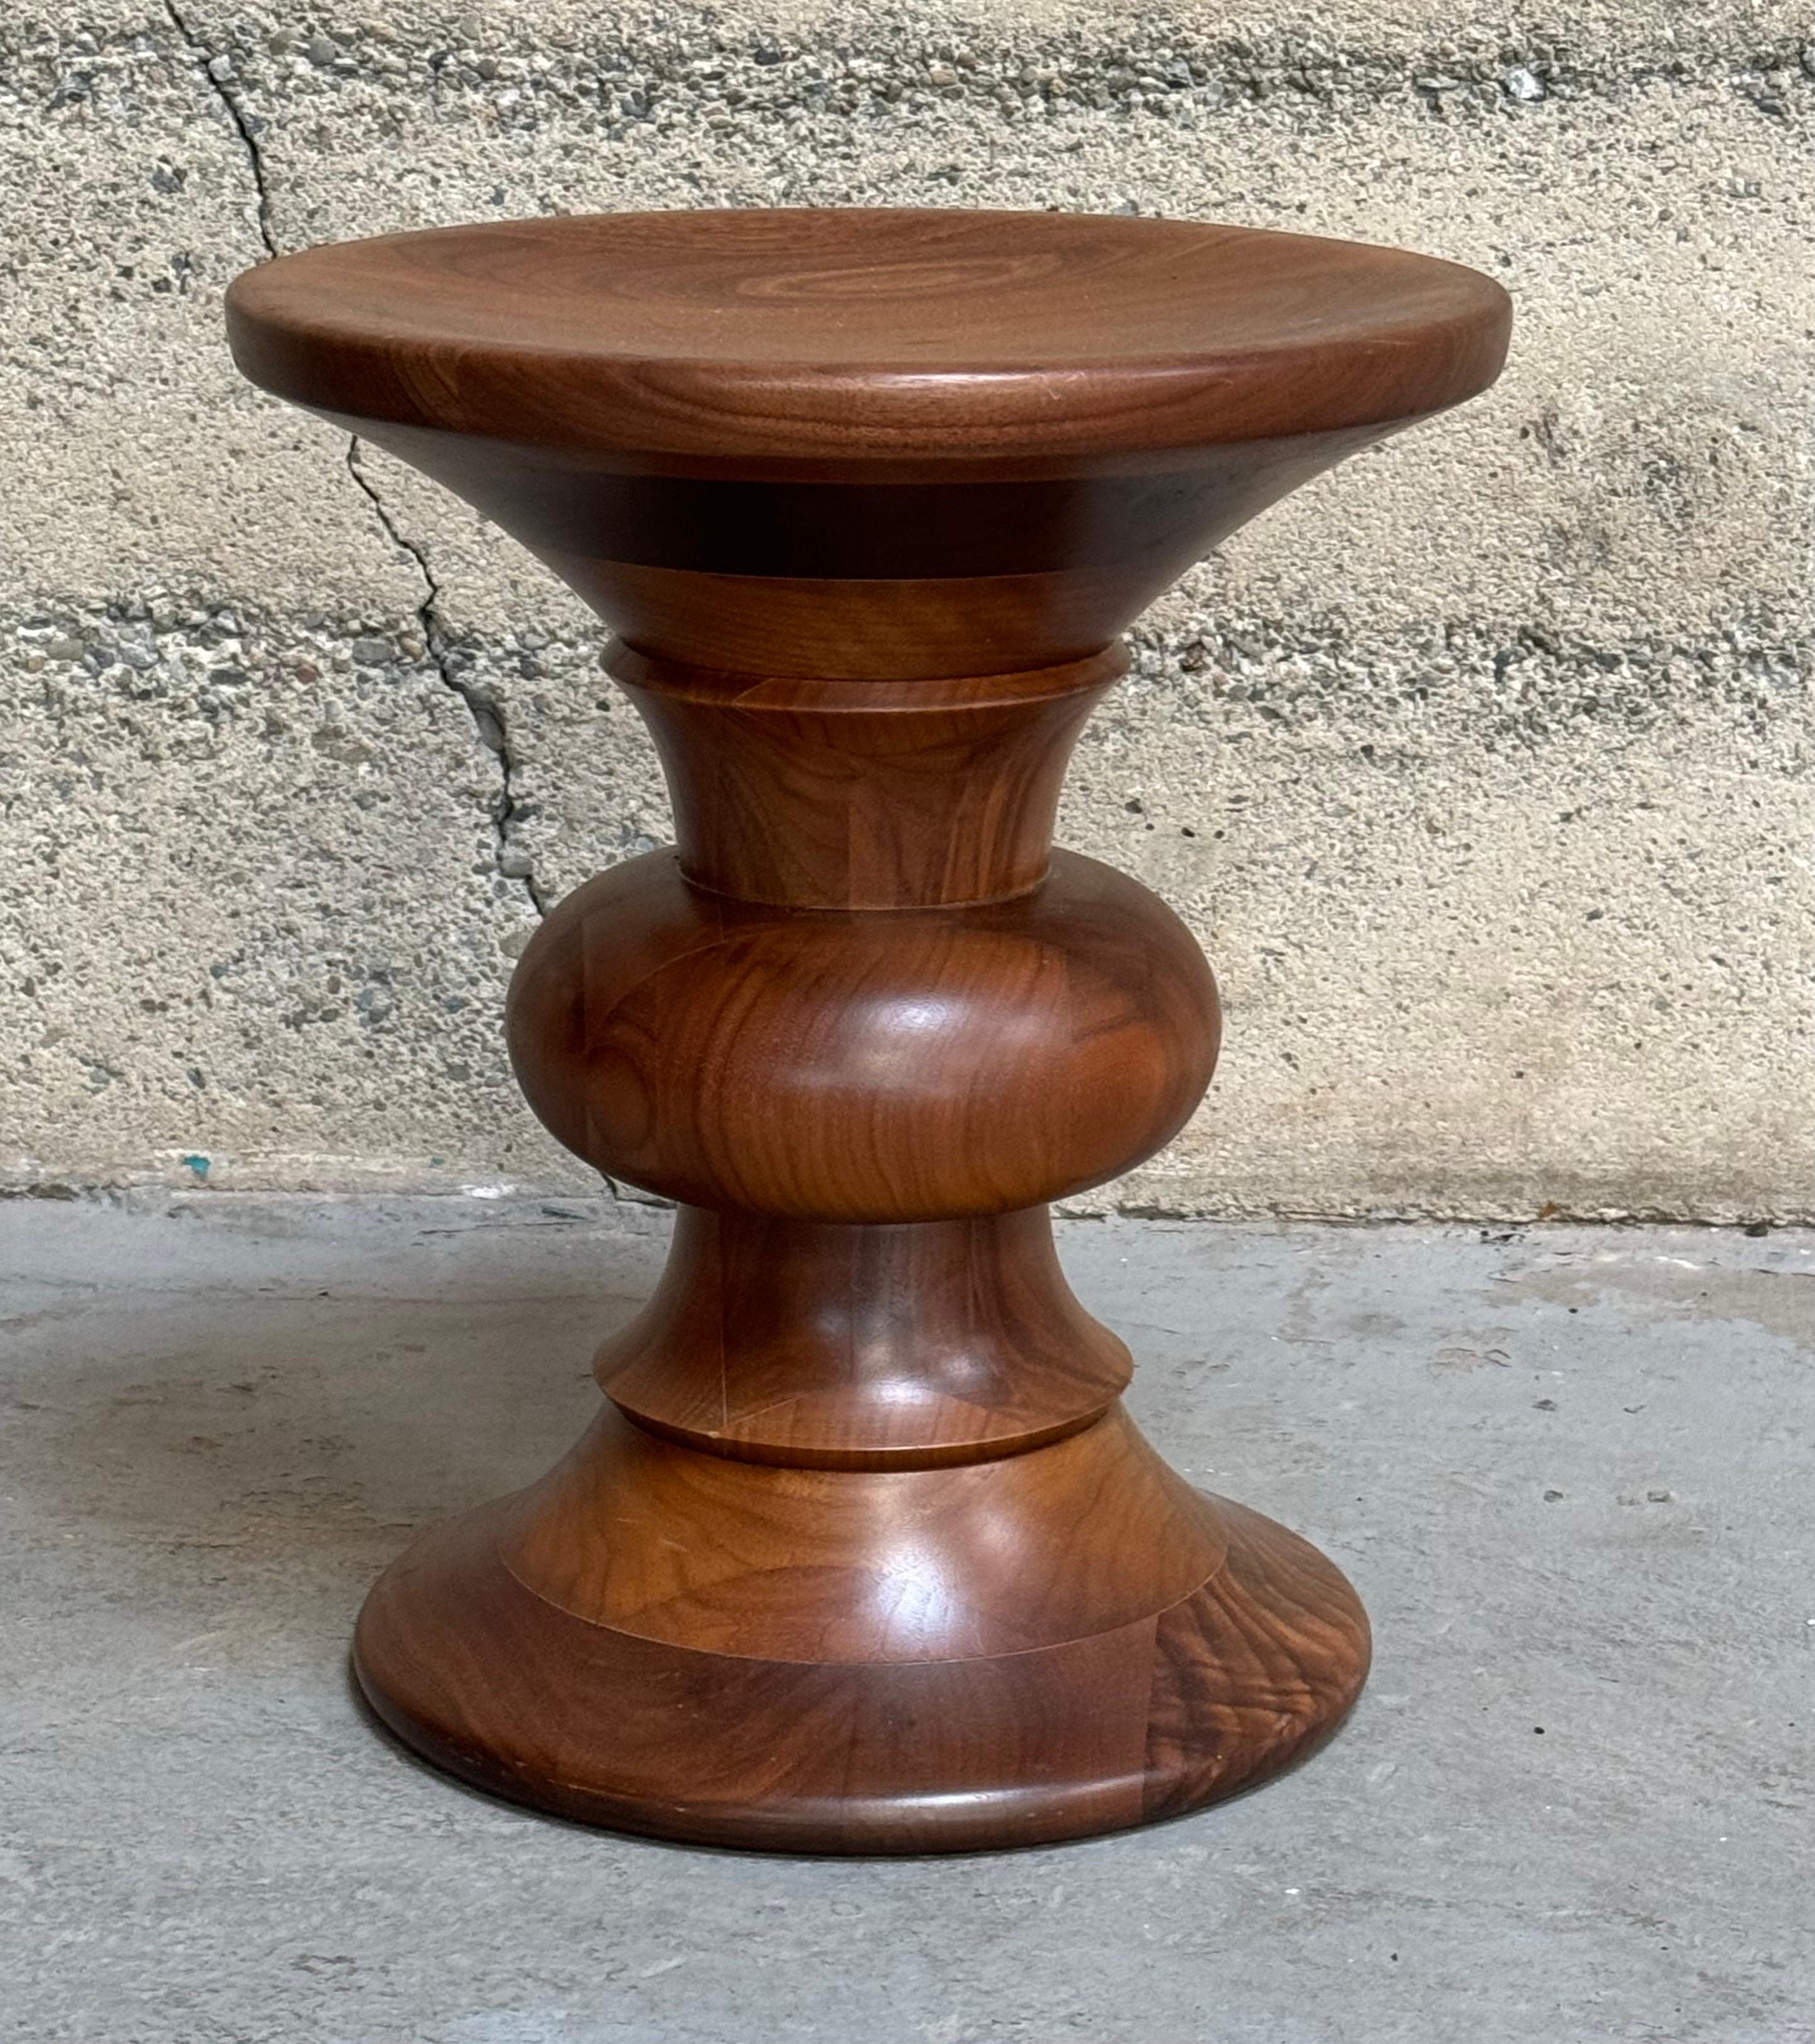 Times Life stool model  designed by Ray and Charles Eames for the Time Life Building during the 1950s, crafted from turned solid walnut. These are newer production pieces, rich color and graining.